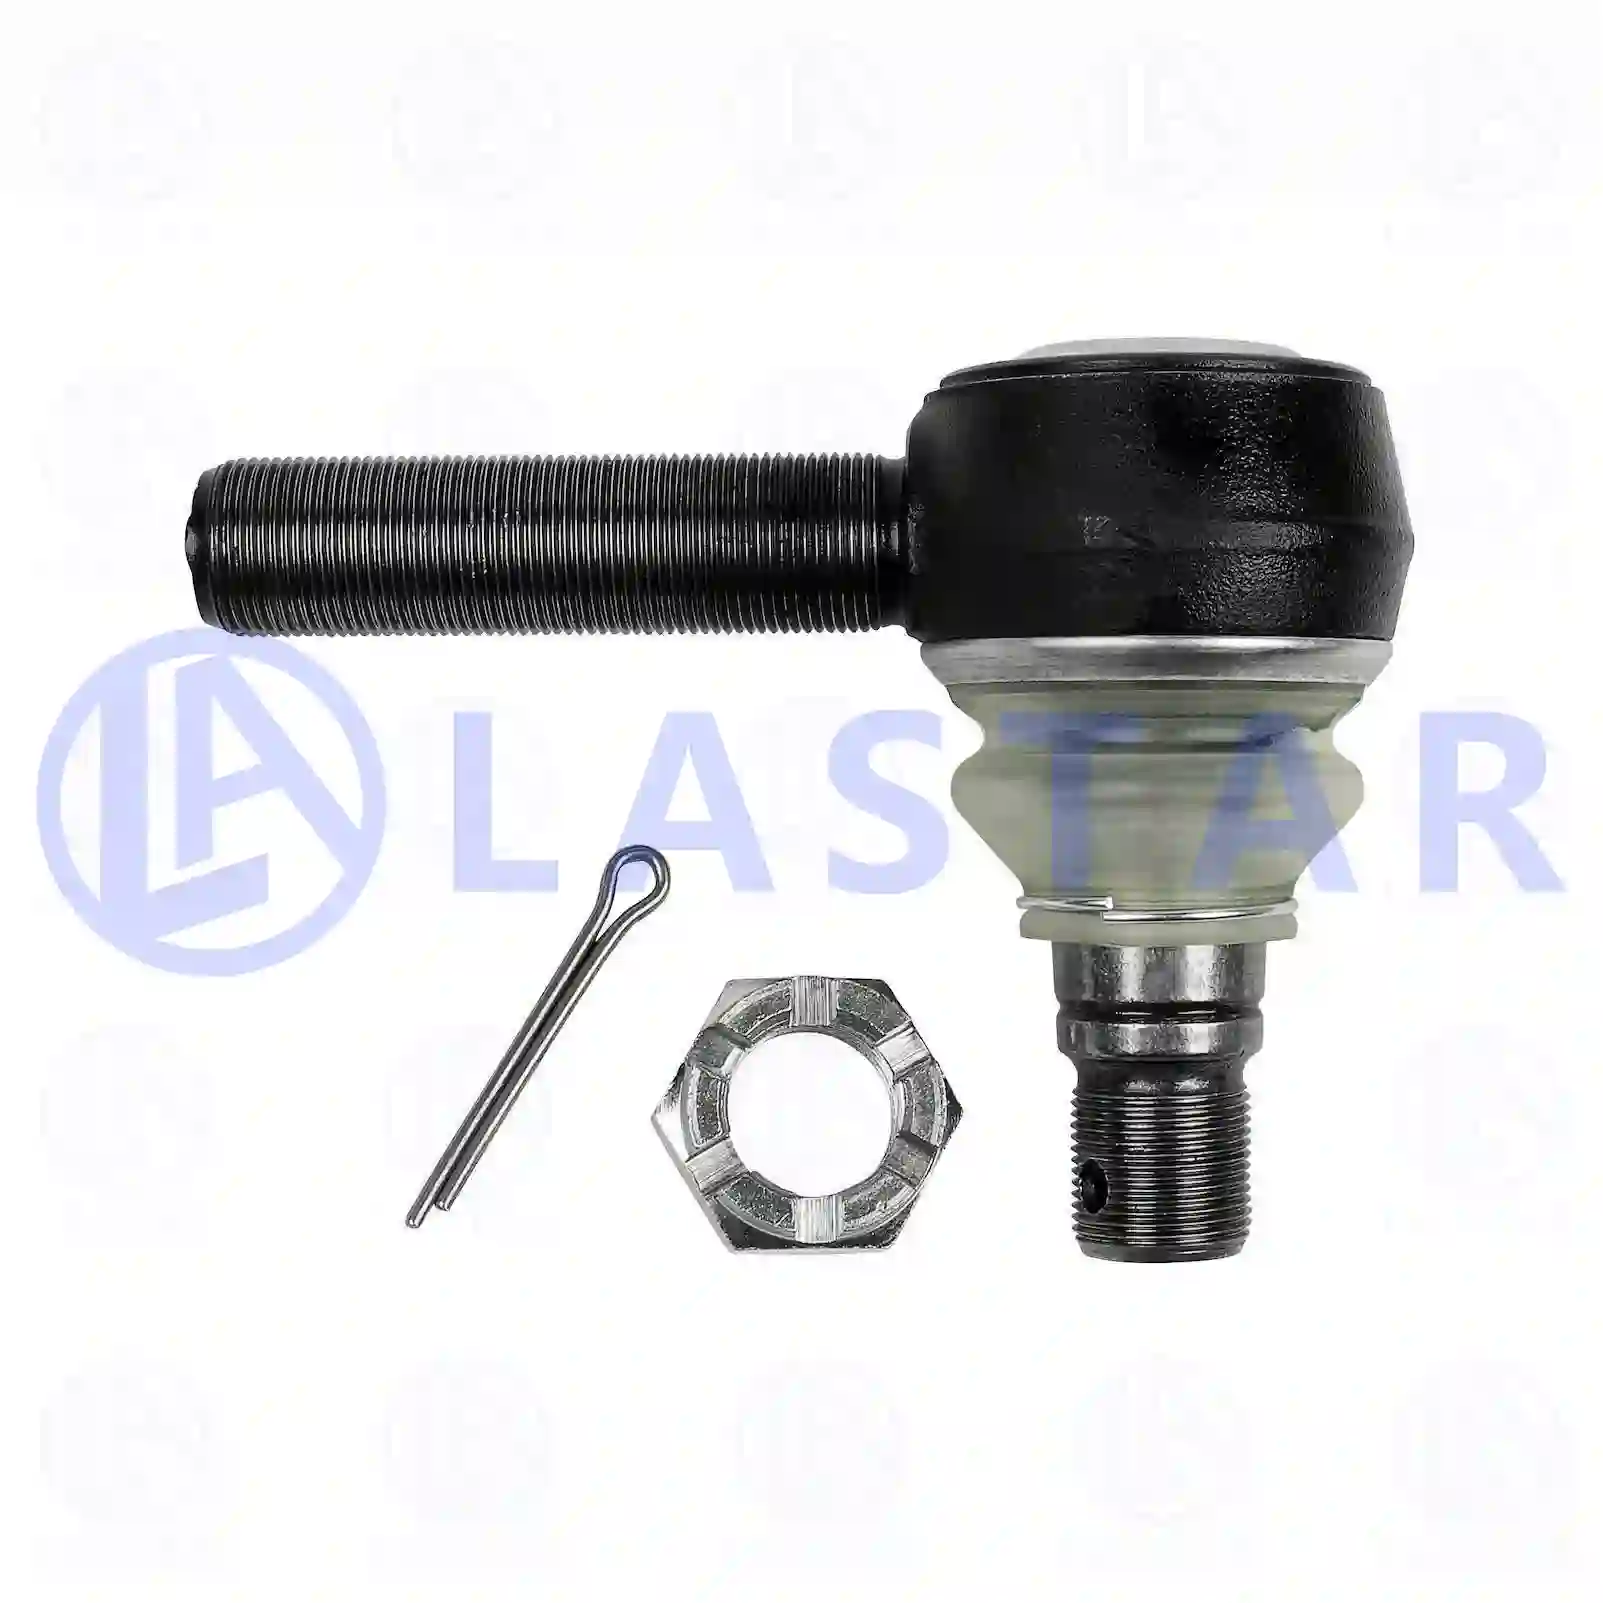 Ball joint, right hand thread, 77705467, 0004607748, , , ||  77705467 Lastar Spare Part | Truck Spare Parts, Auotomotive Spare Parts Ball joint, right hand thread, 77705467, 0004607748, , , ||  77705467 Lastar Spare Part | Truck Spare Parts, Auotomotive Spare Parts